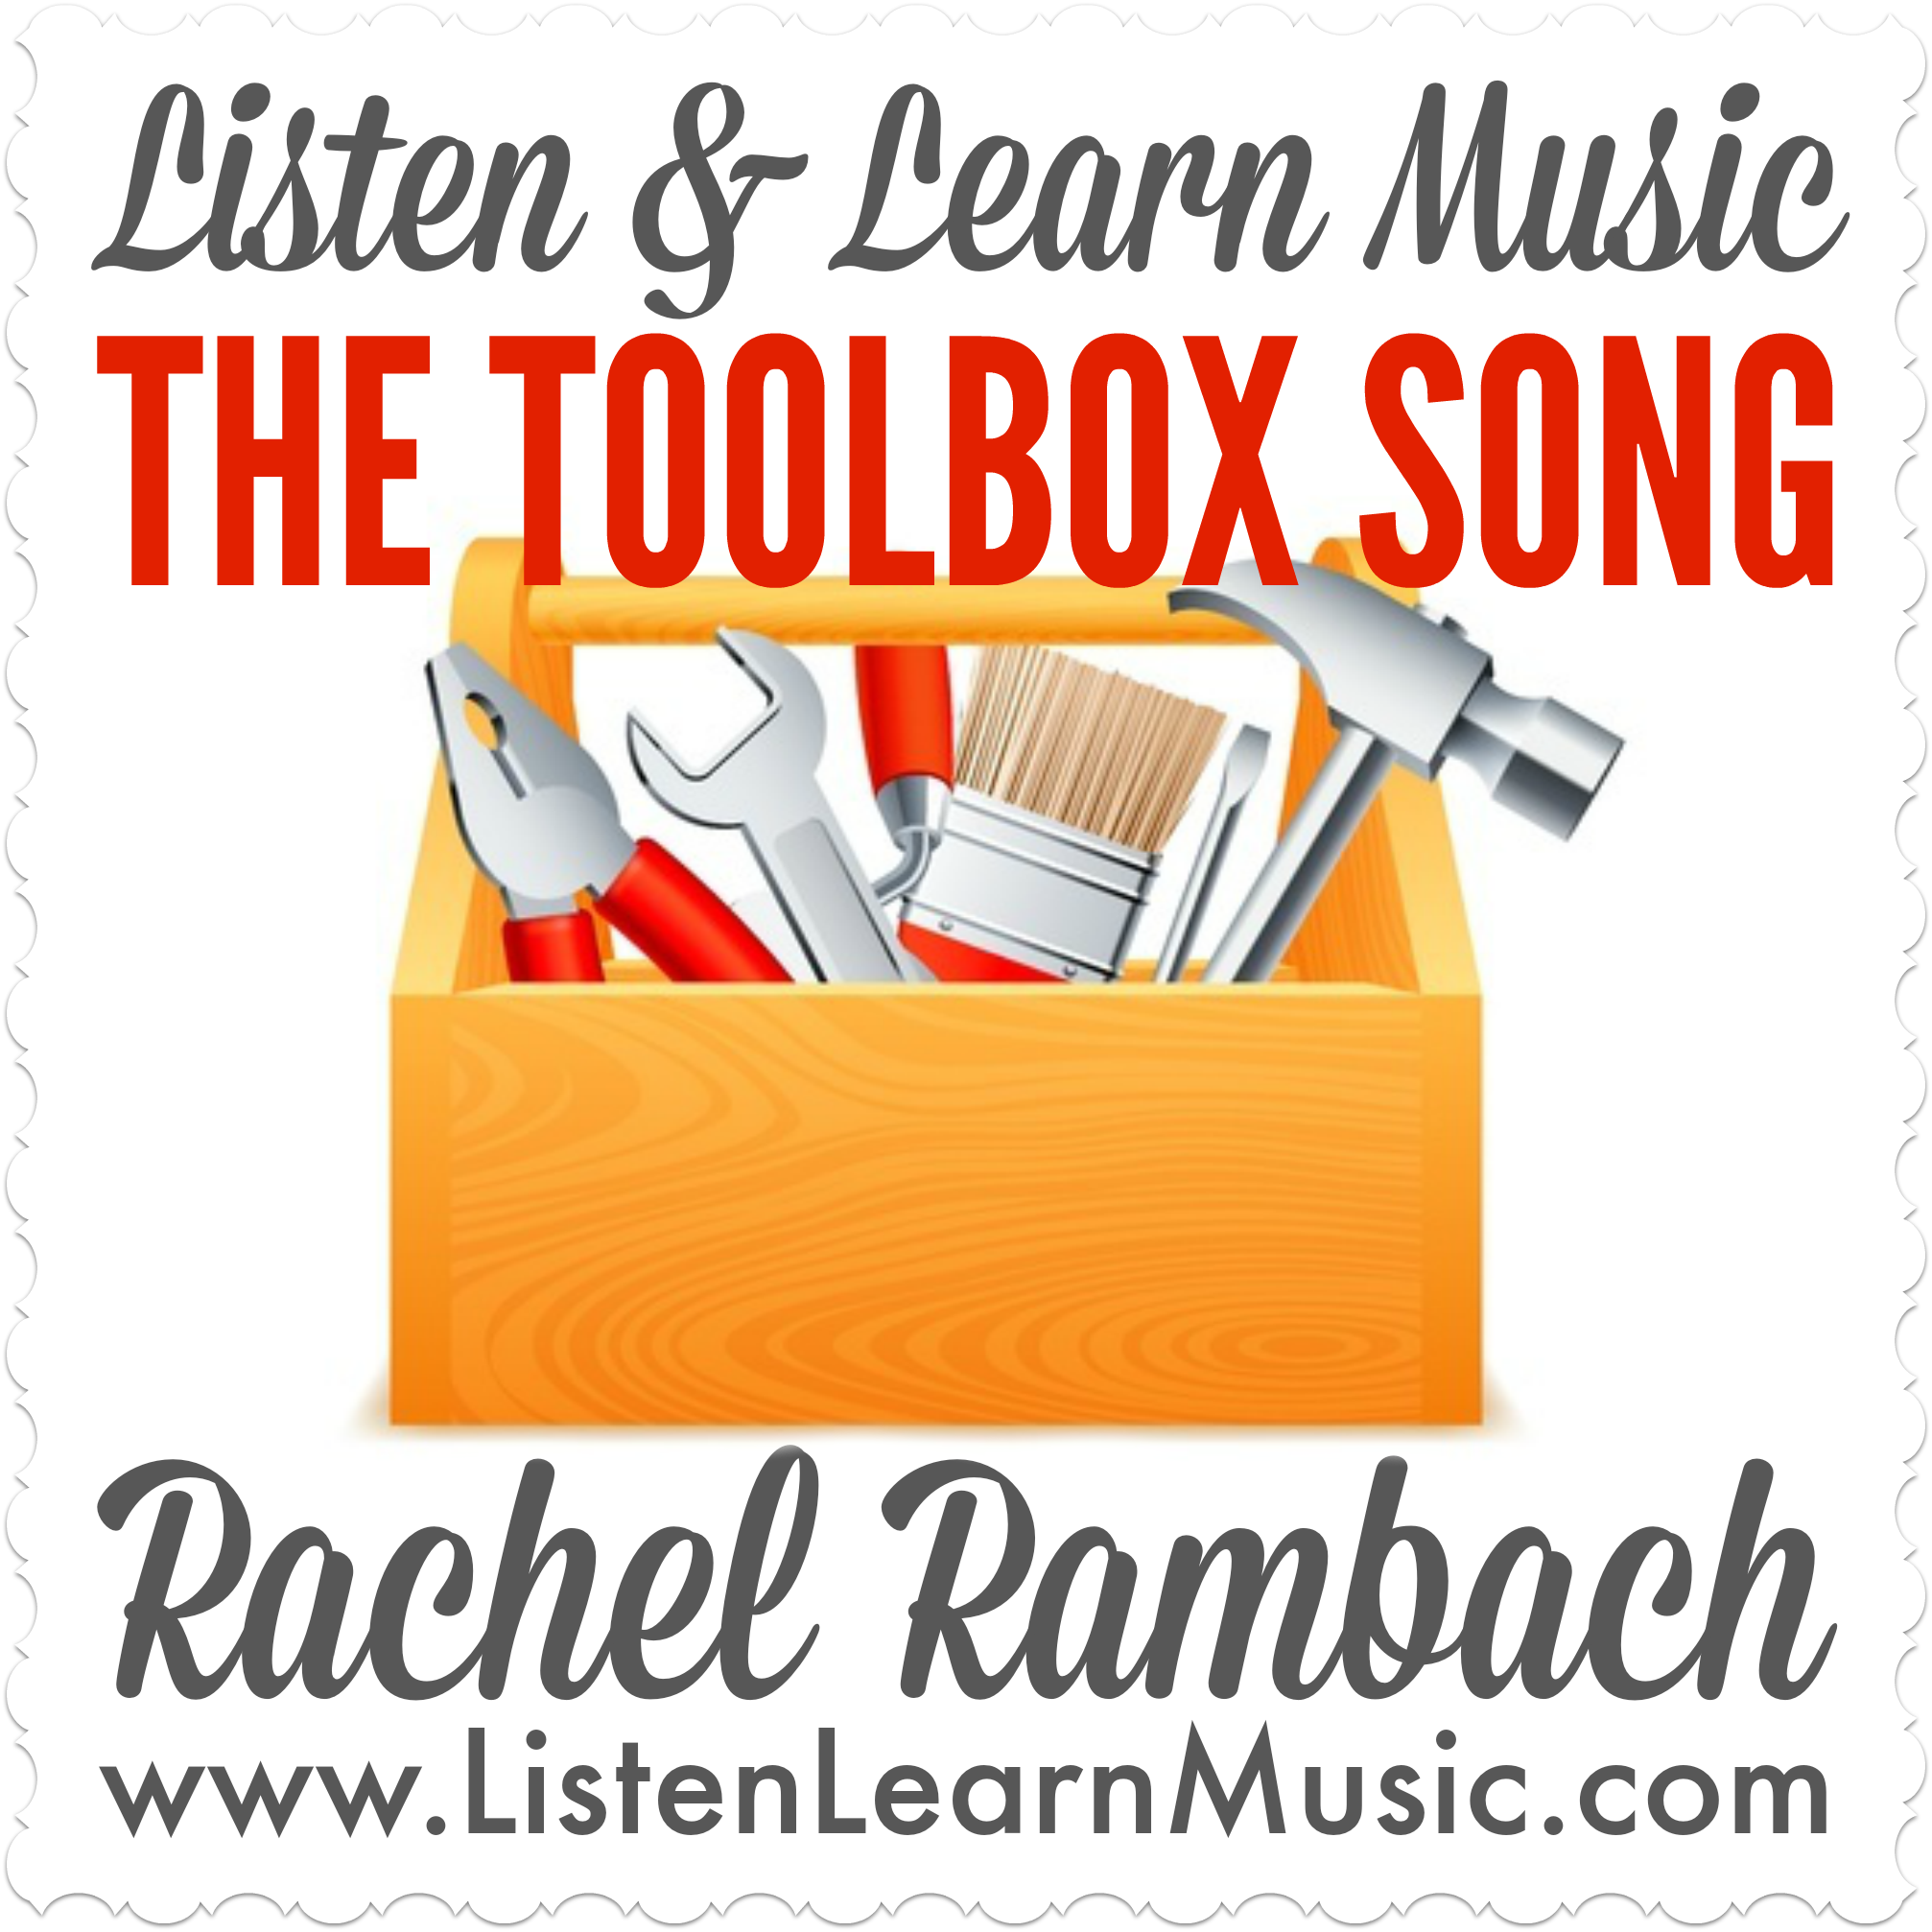 The Toolbox Song 